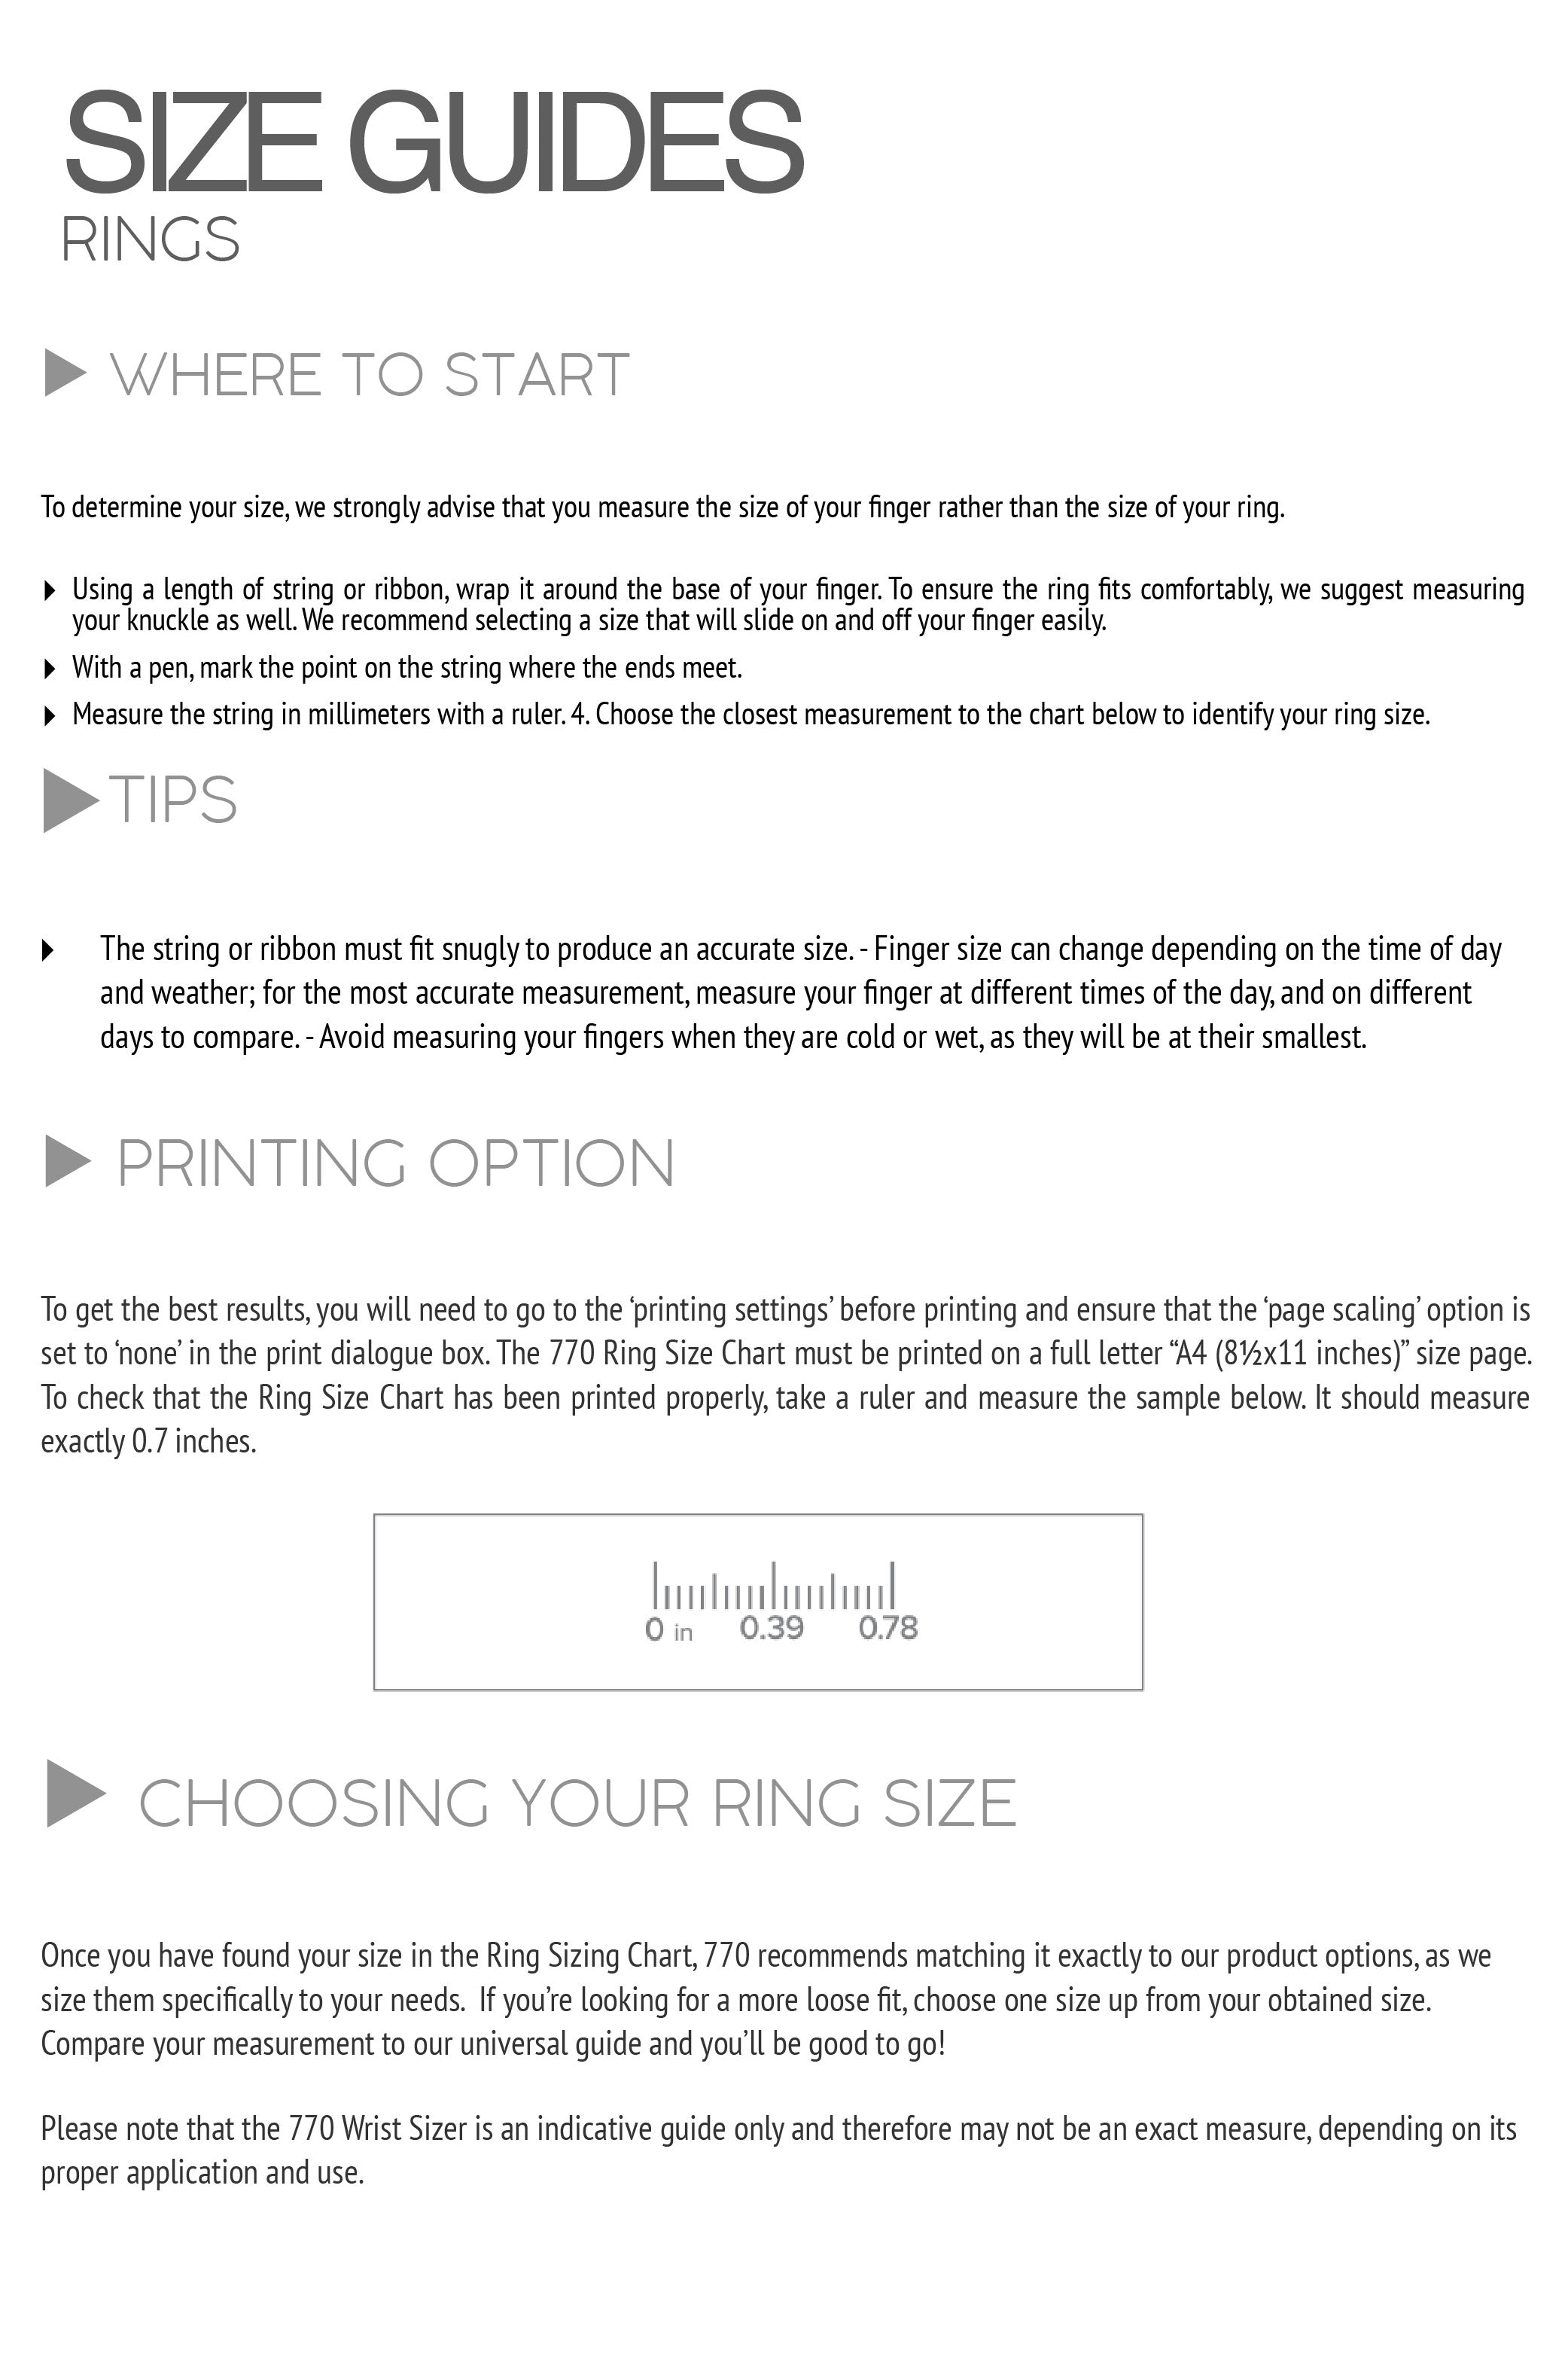 Get a FREE Ring Sizer